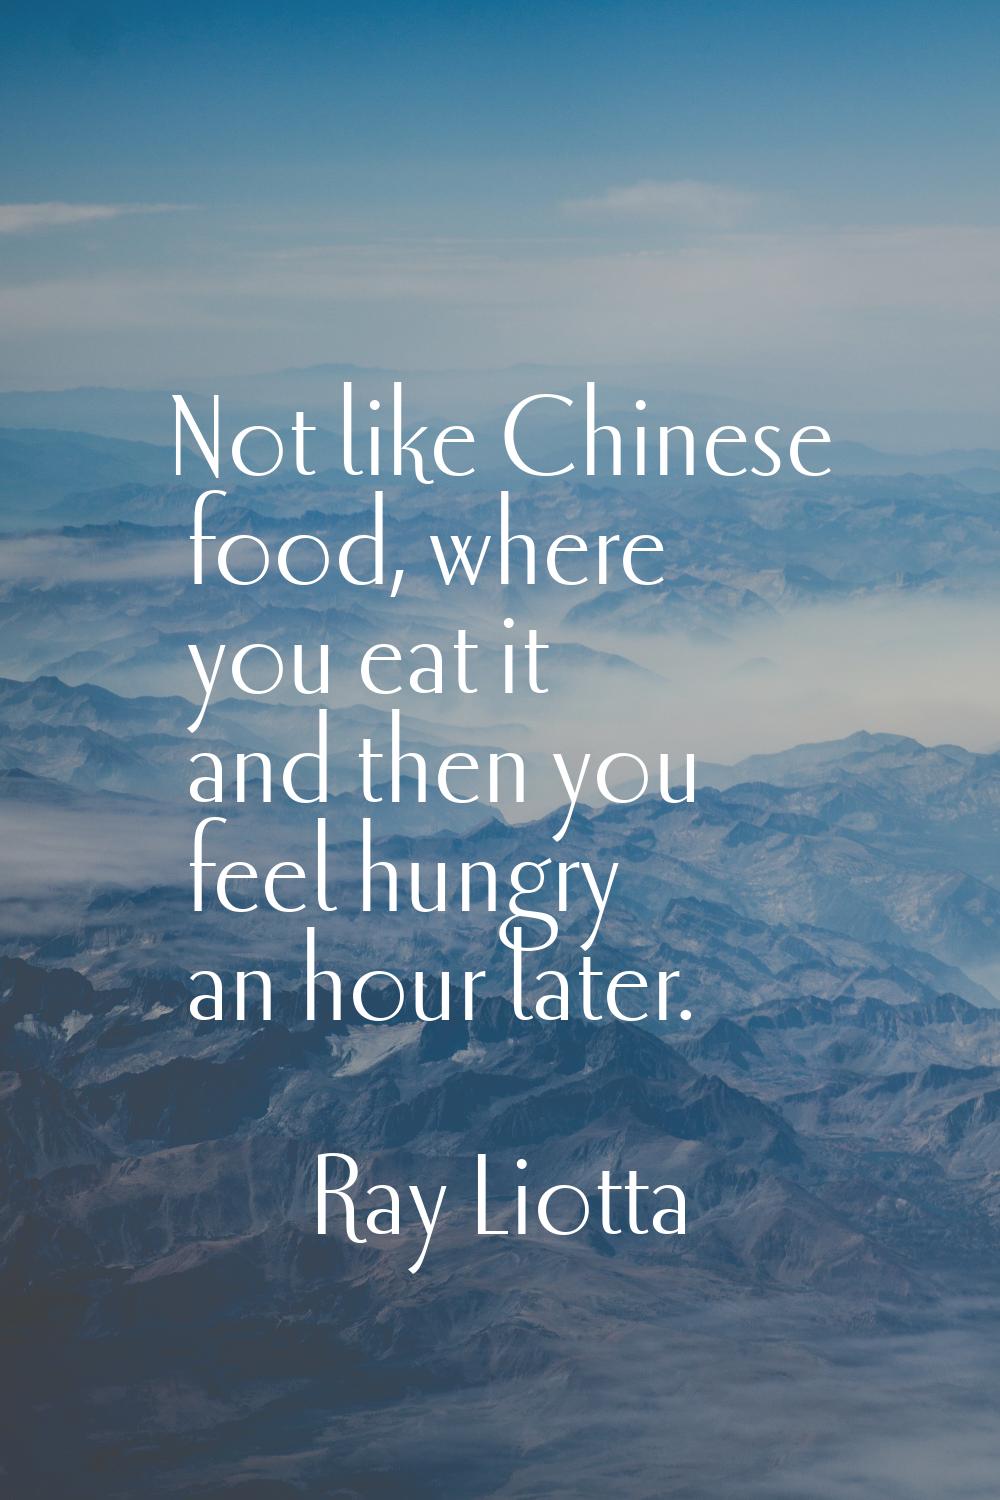 Not like Chinese food, where you eat it and then you feel hungry an hour later.